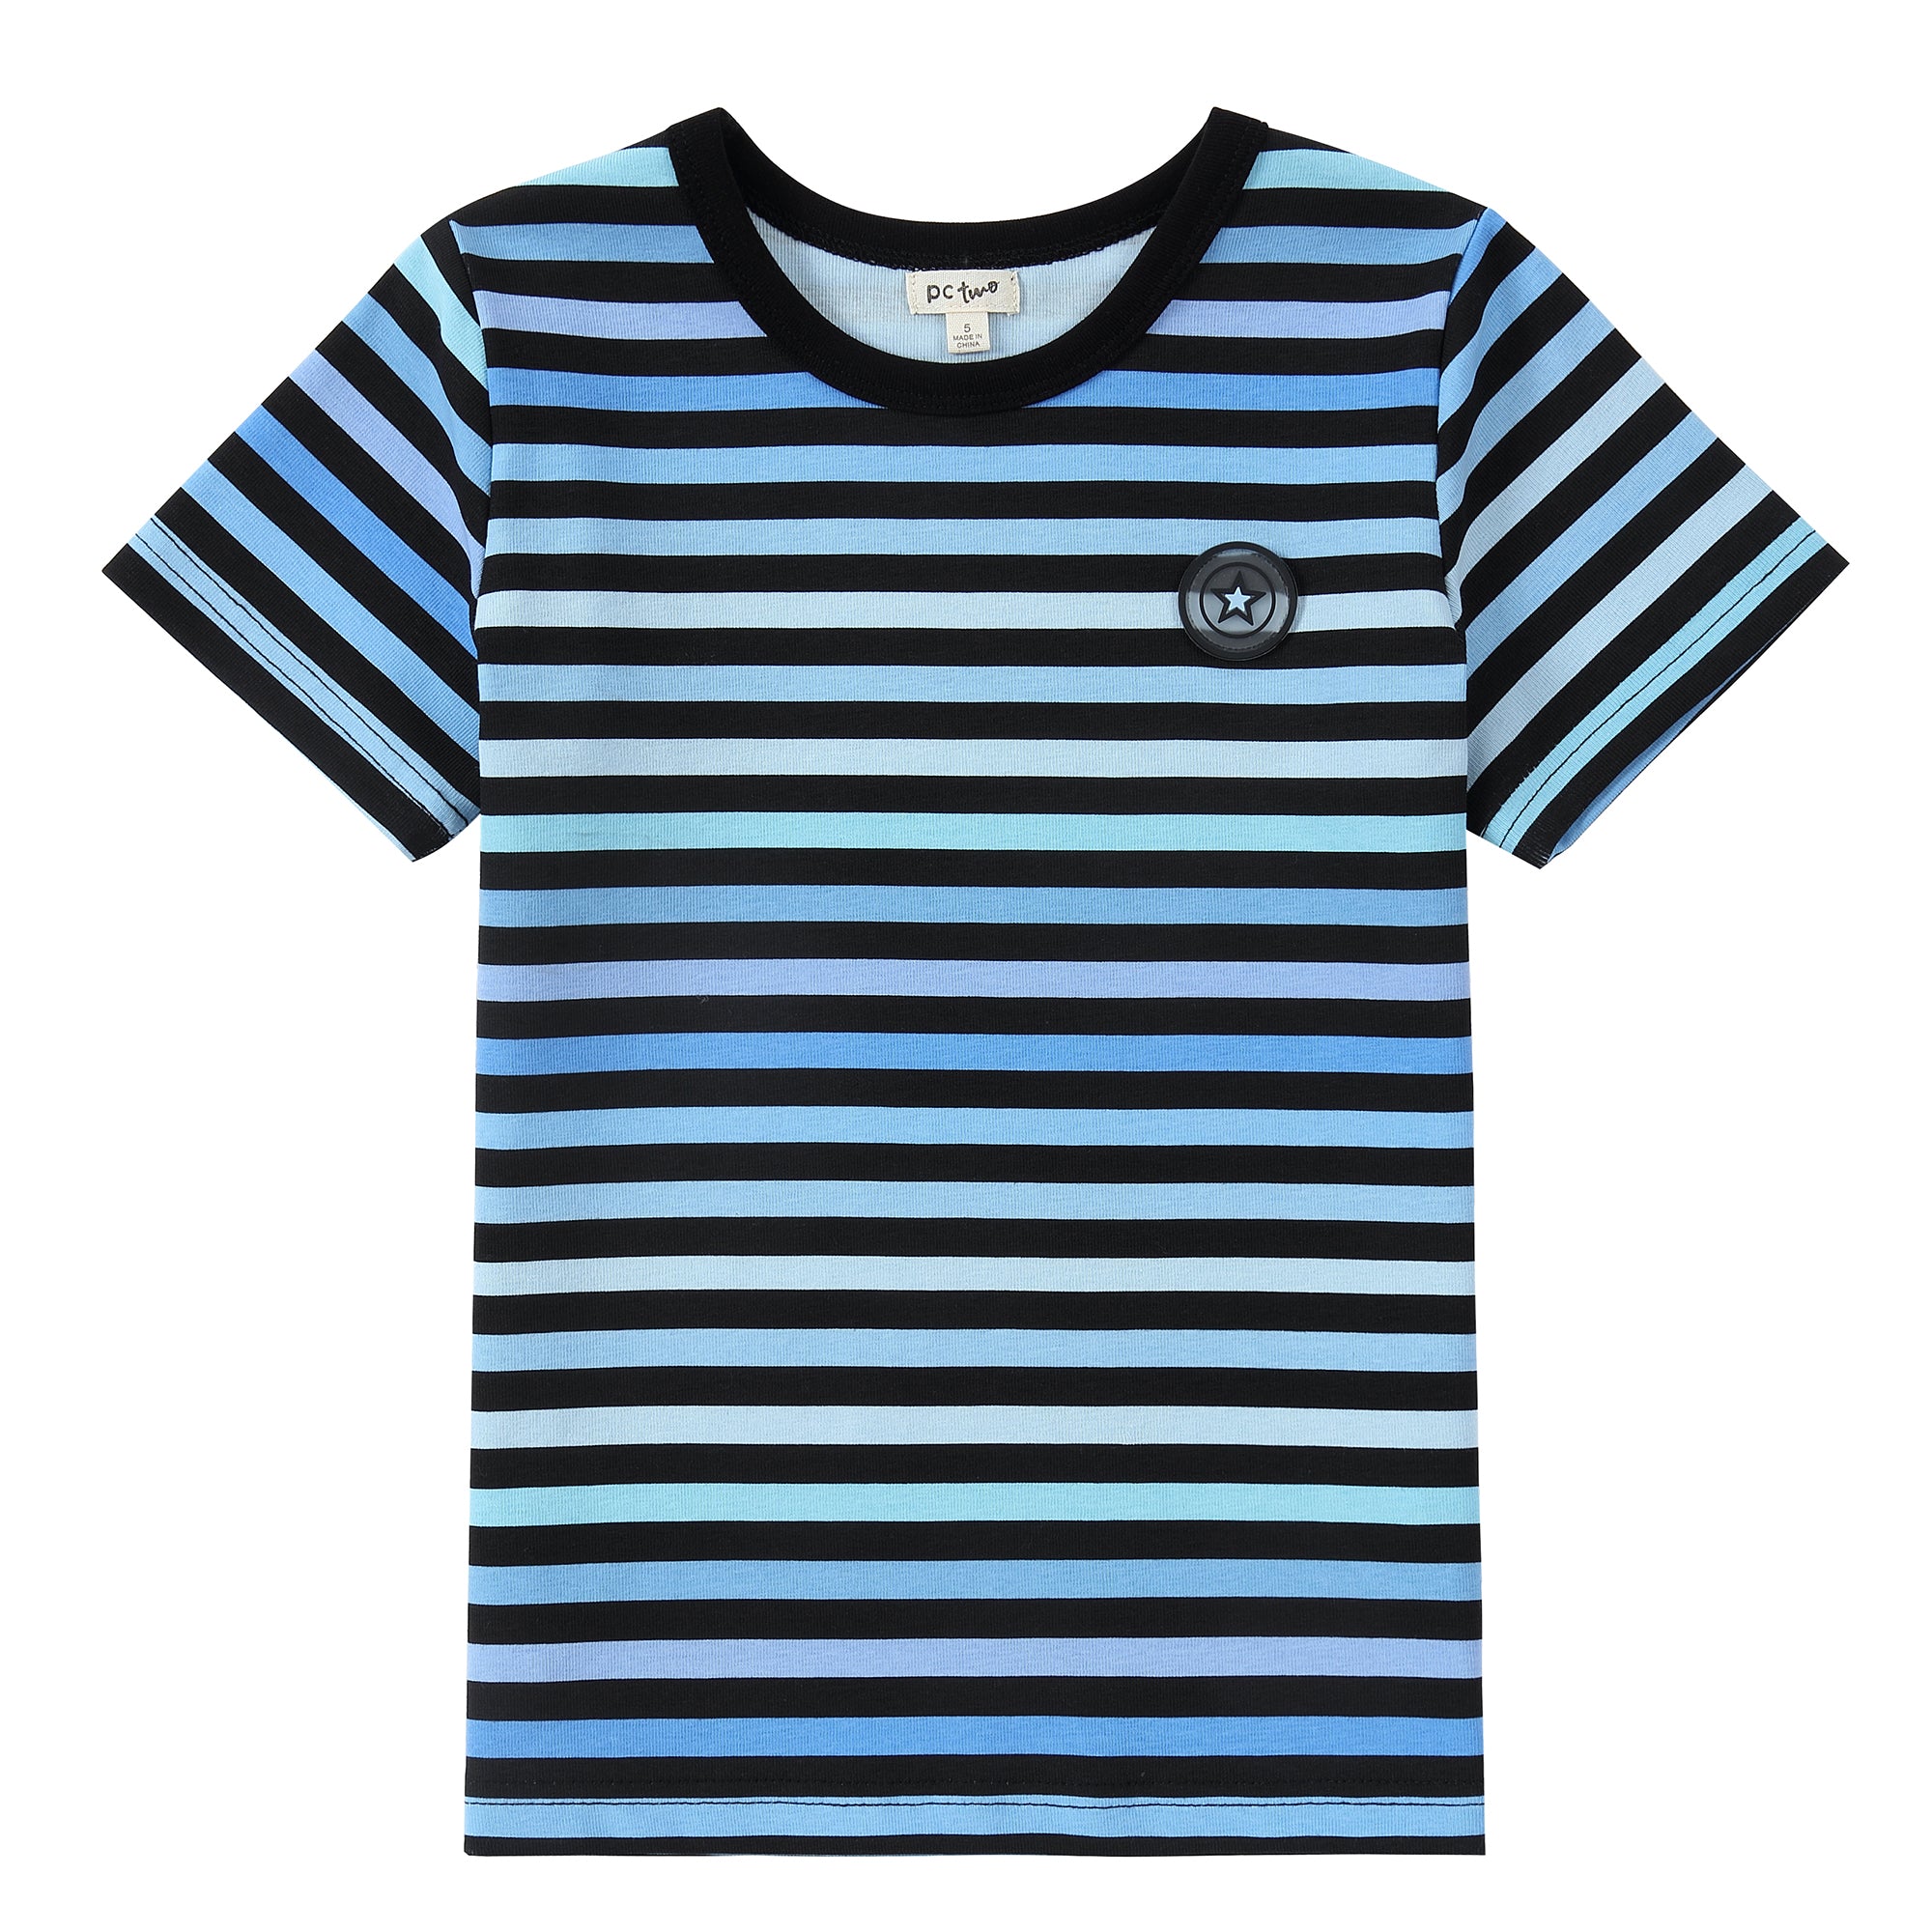 Blue and Black Striped T-Shirt